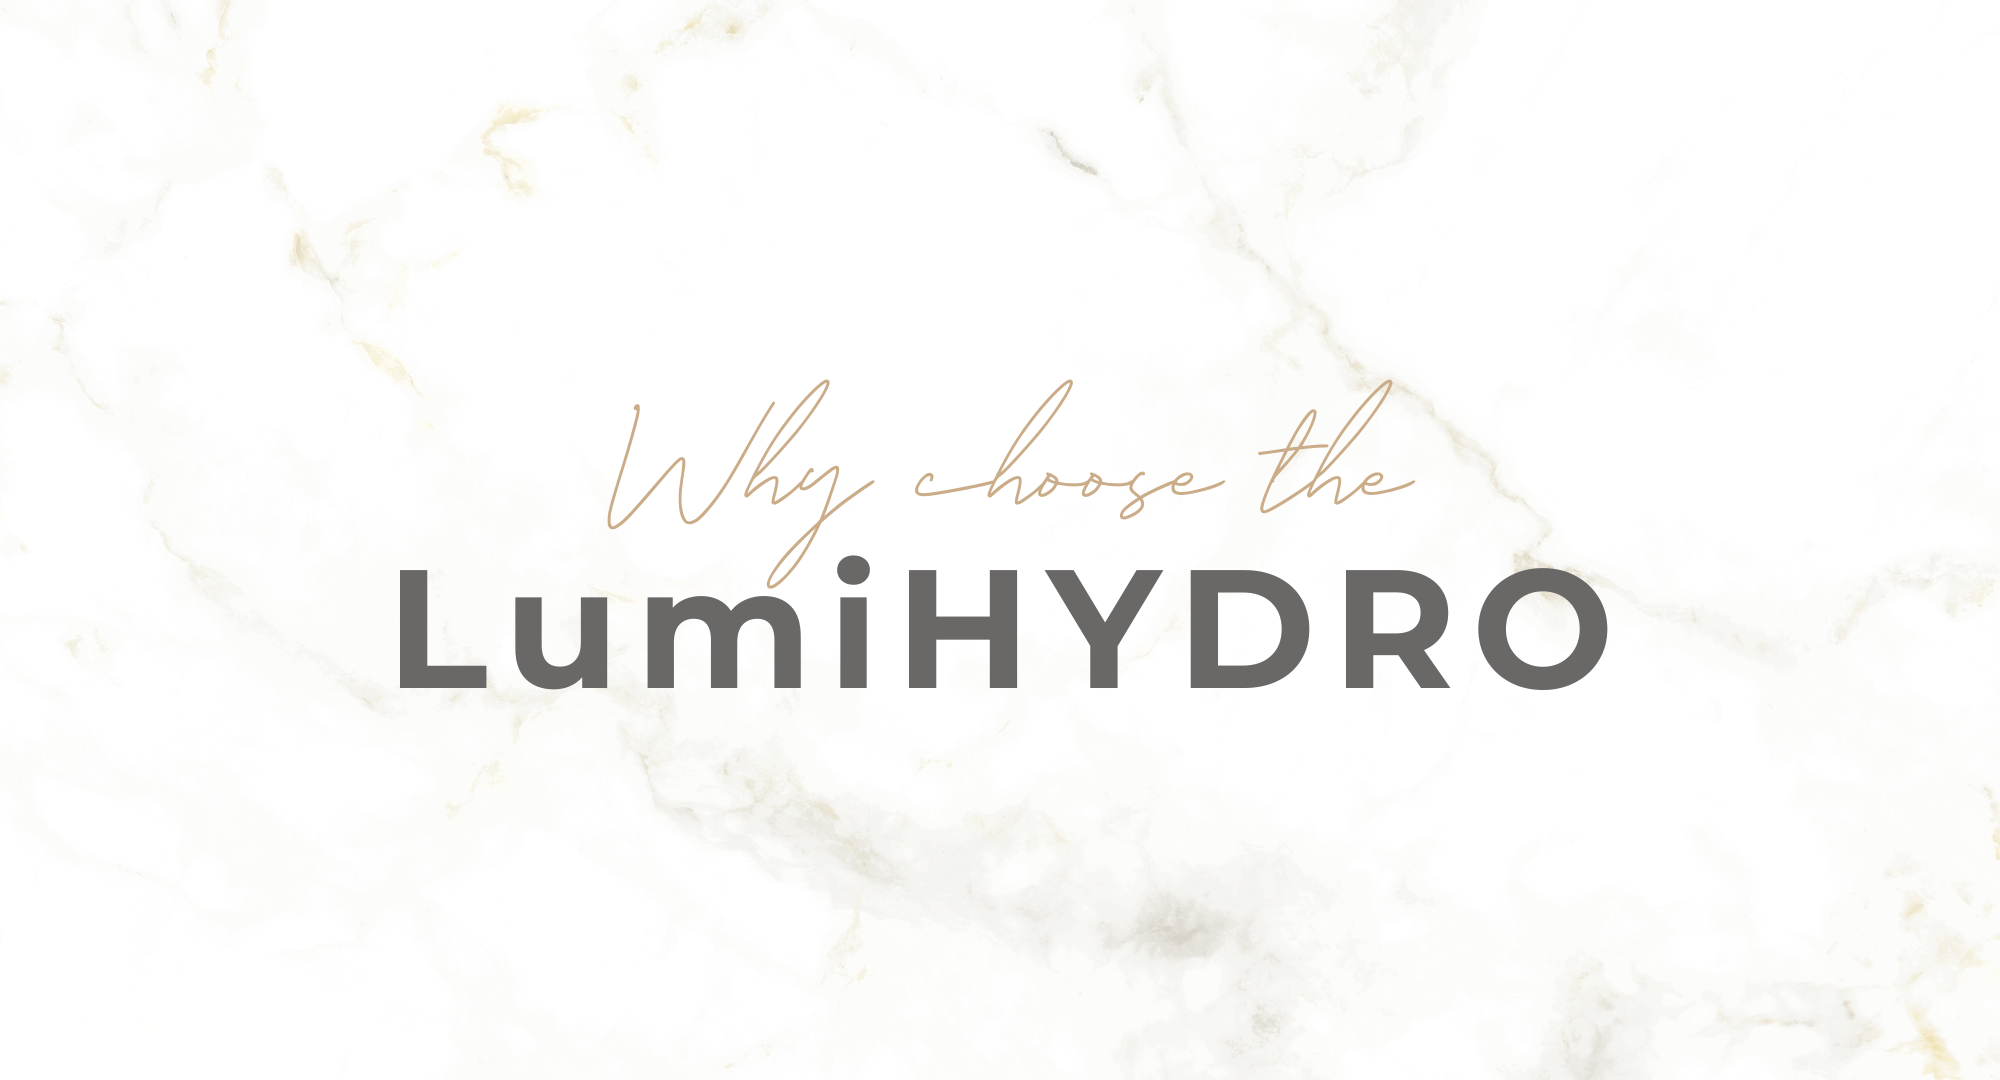 Why we love the LumiHYDRO